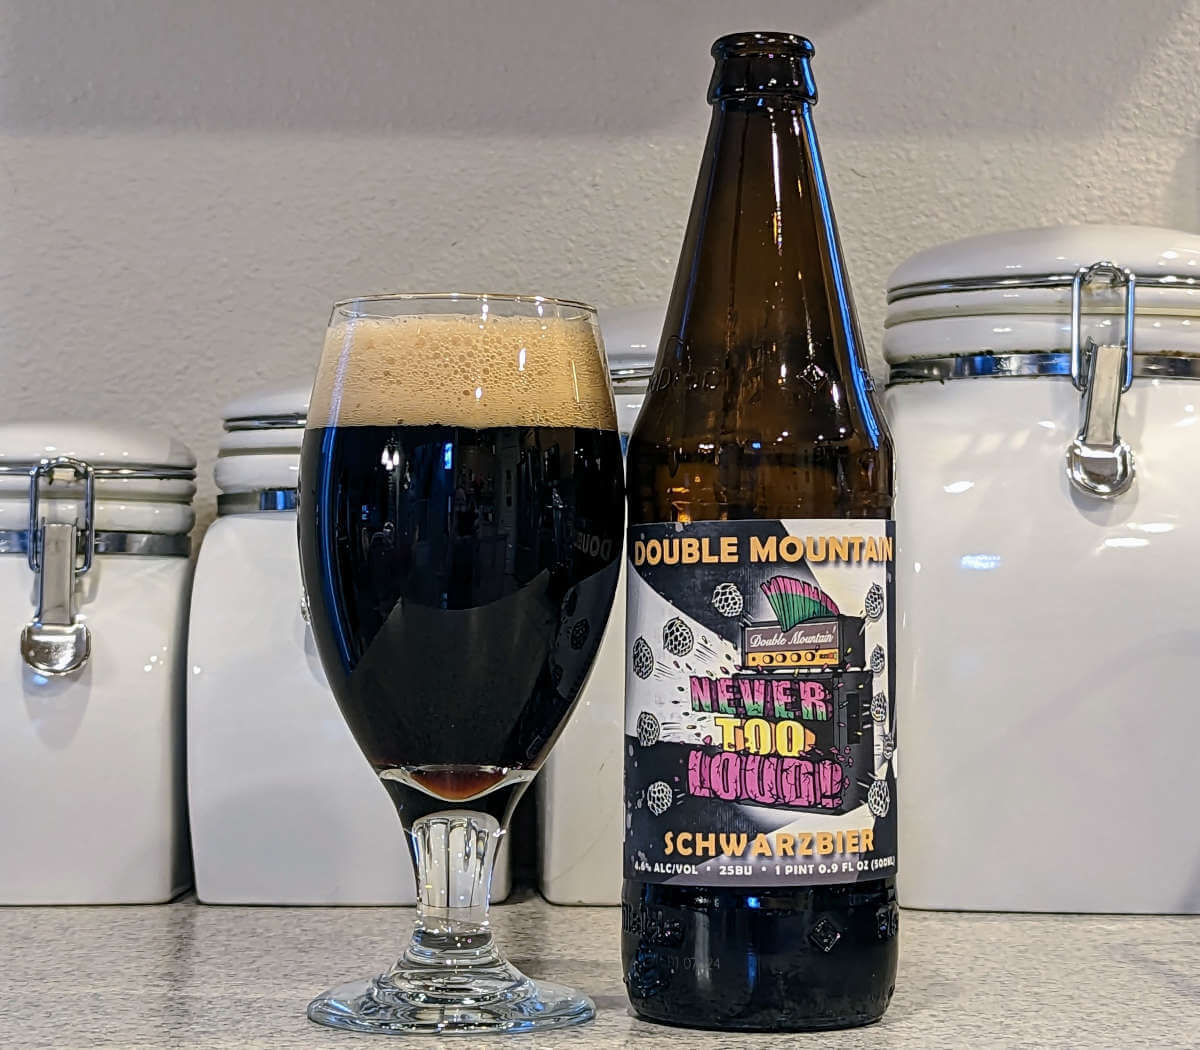 Too Loud? Never! Reviewing Double Mountain Brewery’s Schwarzbier